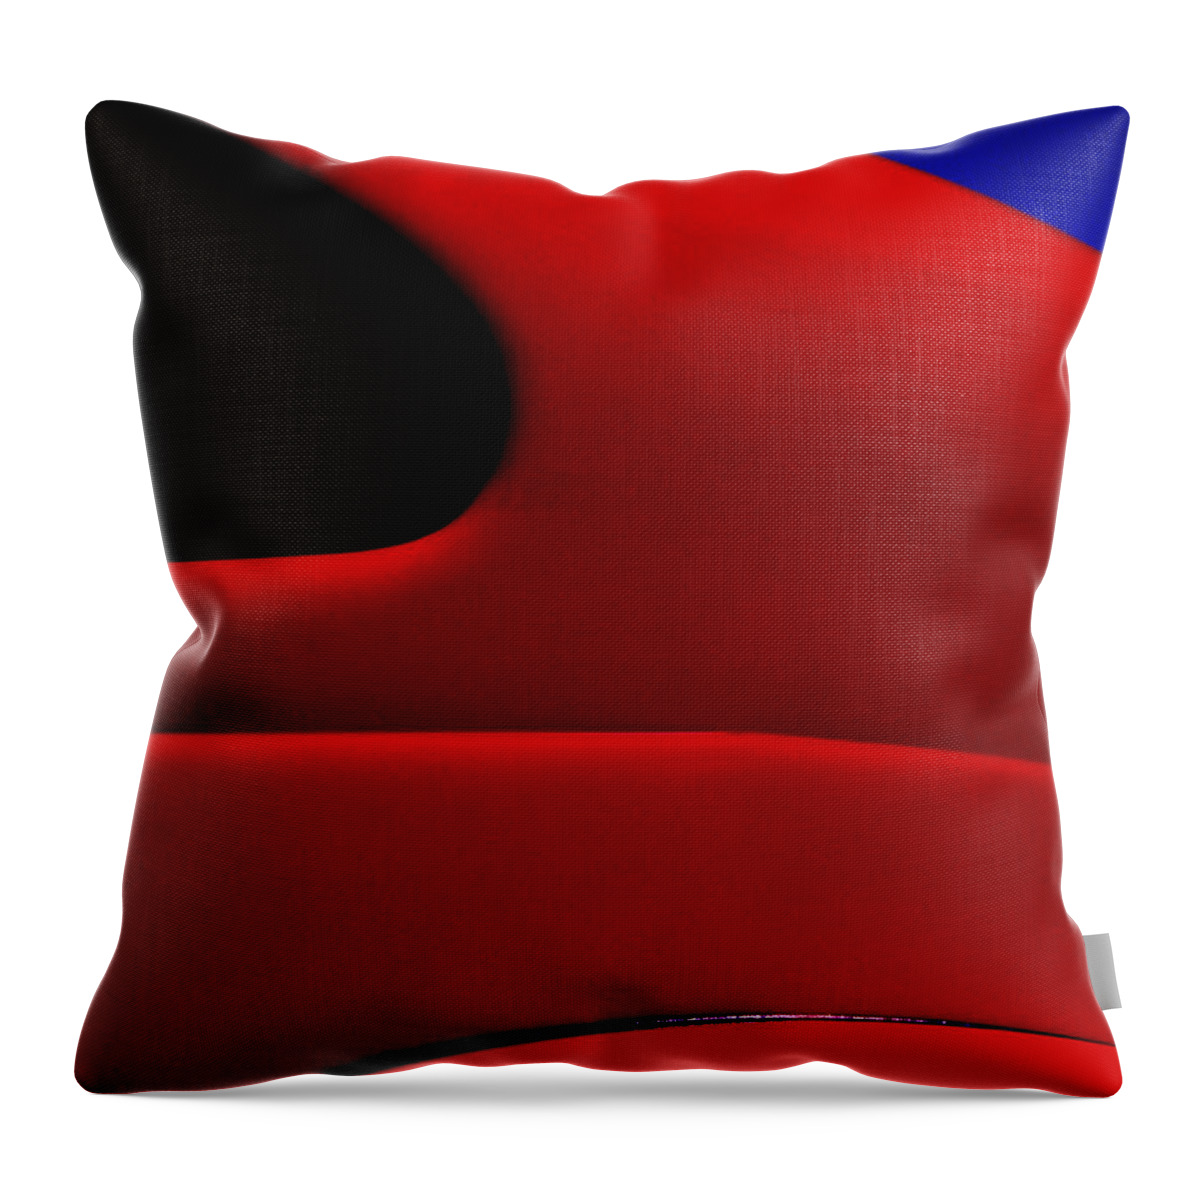 Red Throw Pillow featuring the photograph Red Hot - Hot Rod by Paul W Faust - Impressions of Light